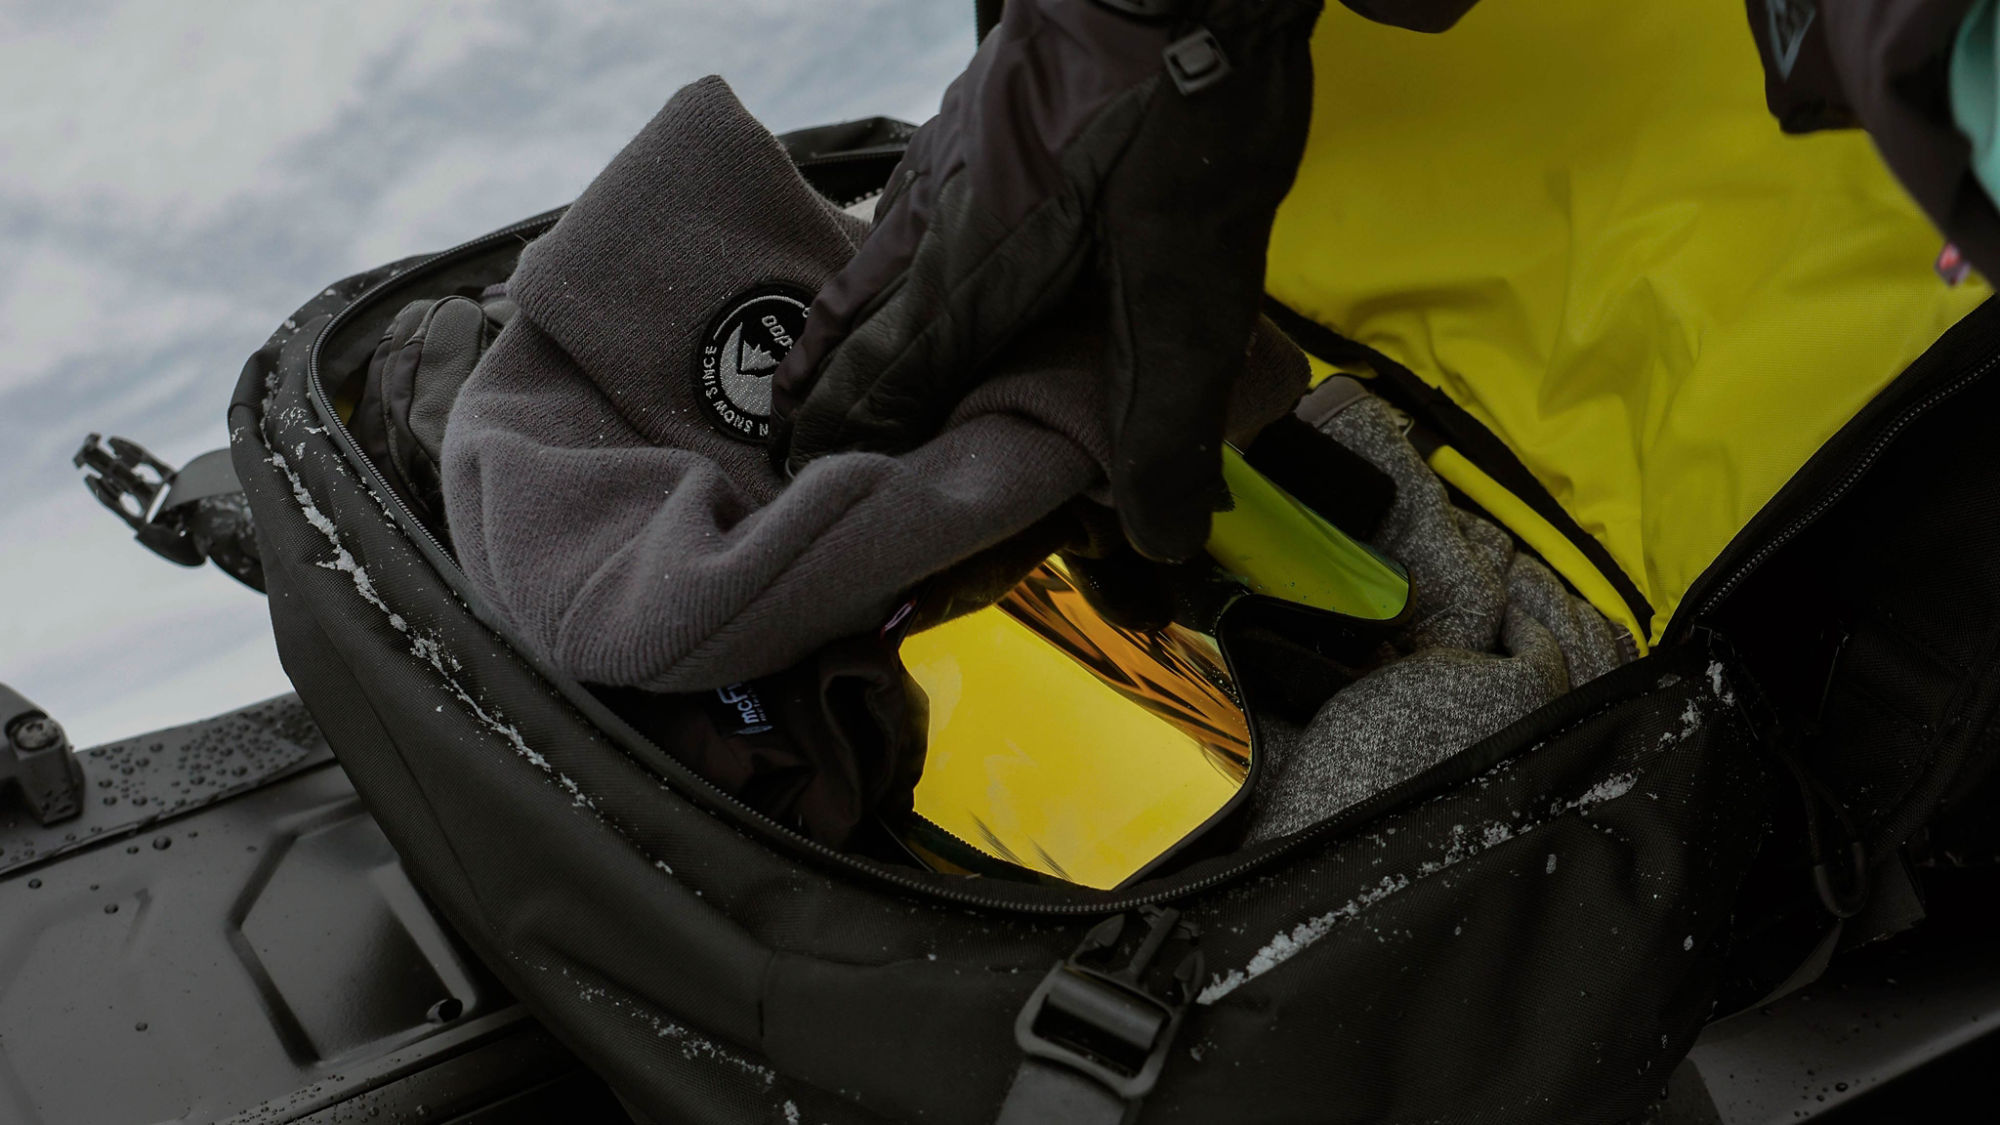 Rider packing items in a LinQ bag on his 2025 Ski-Doo NEO+